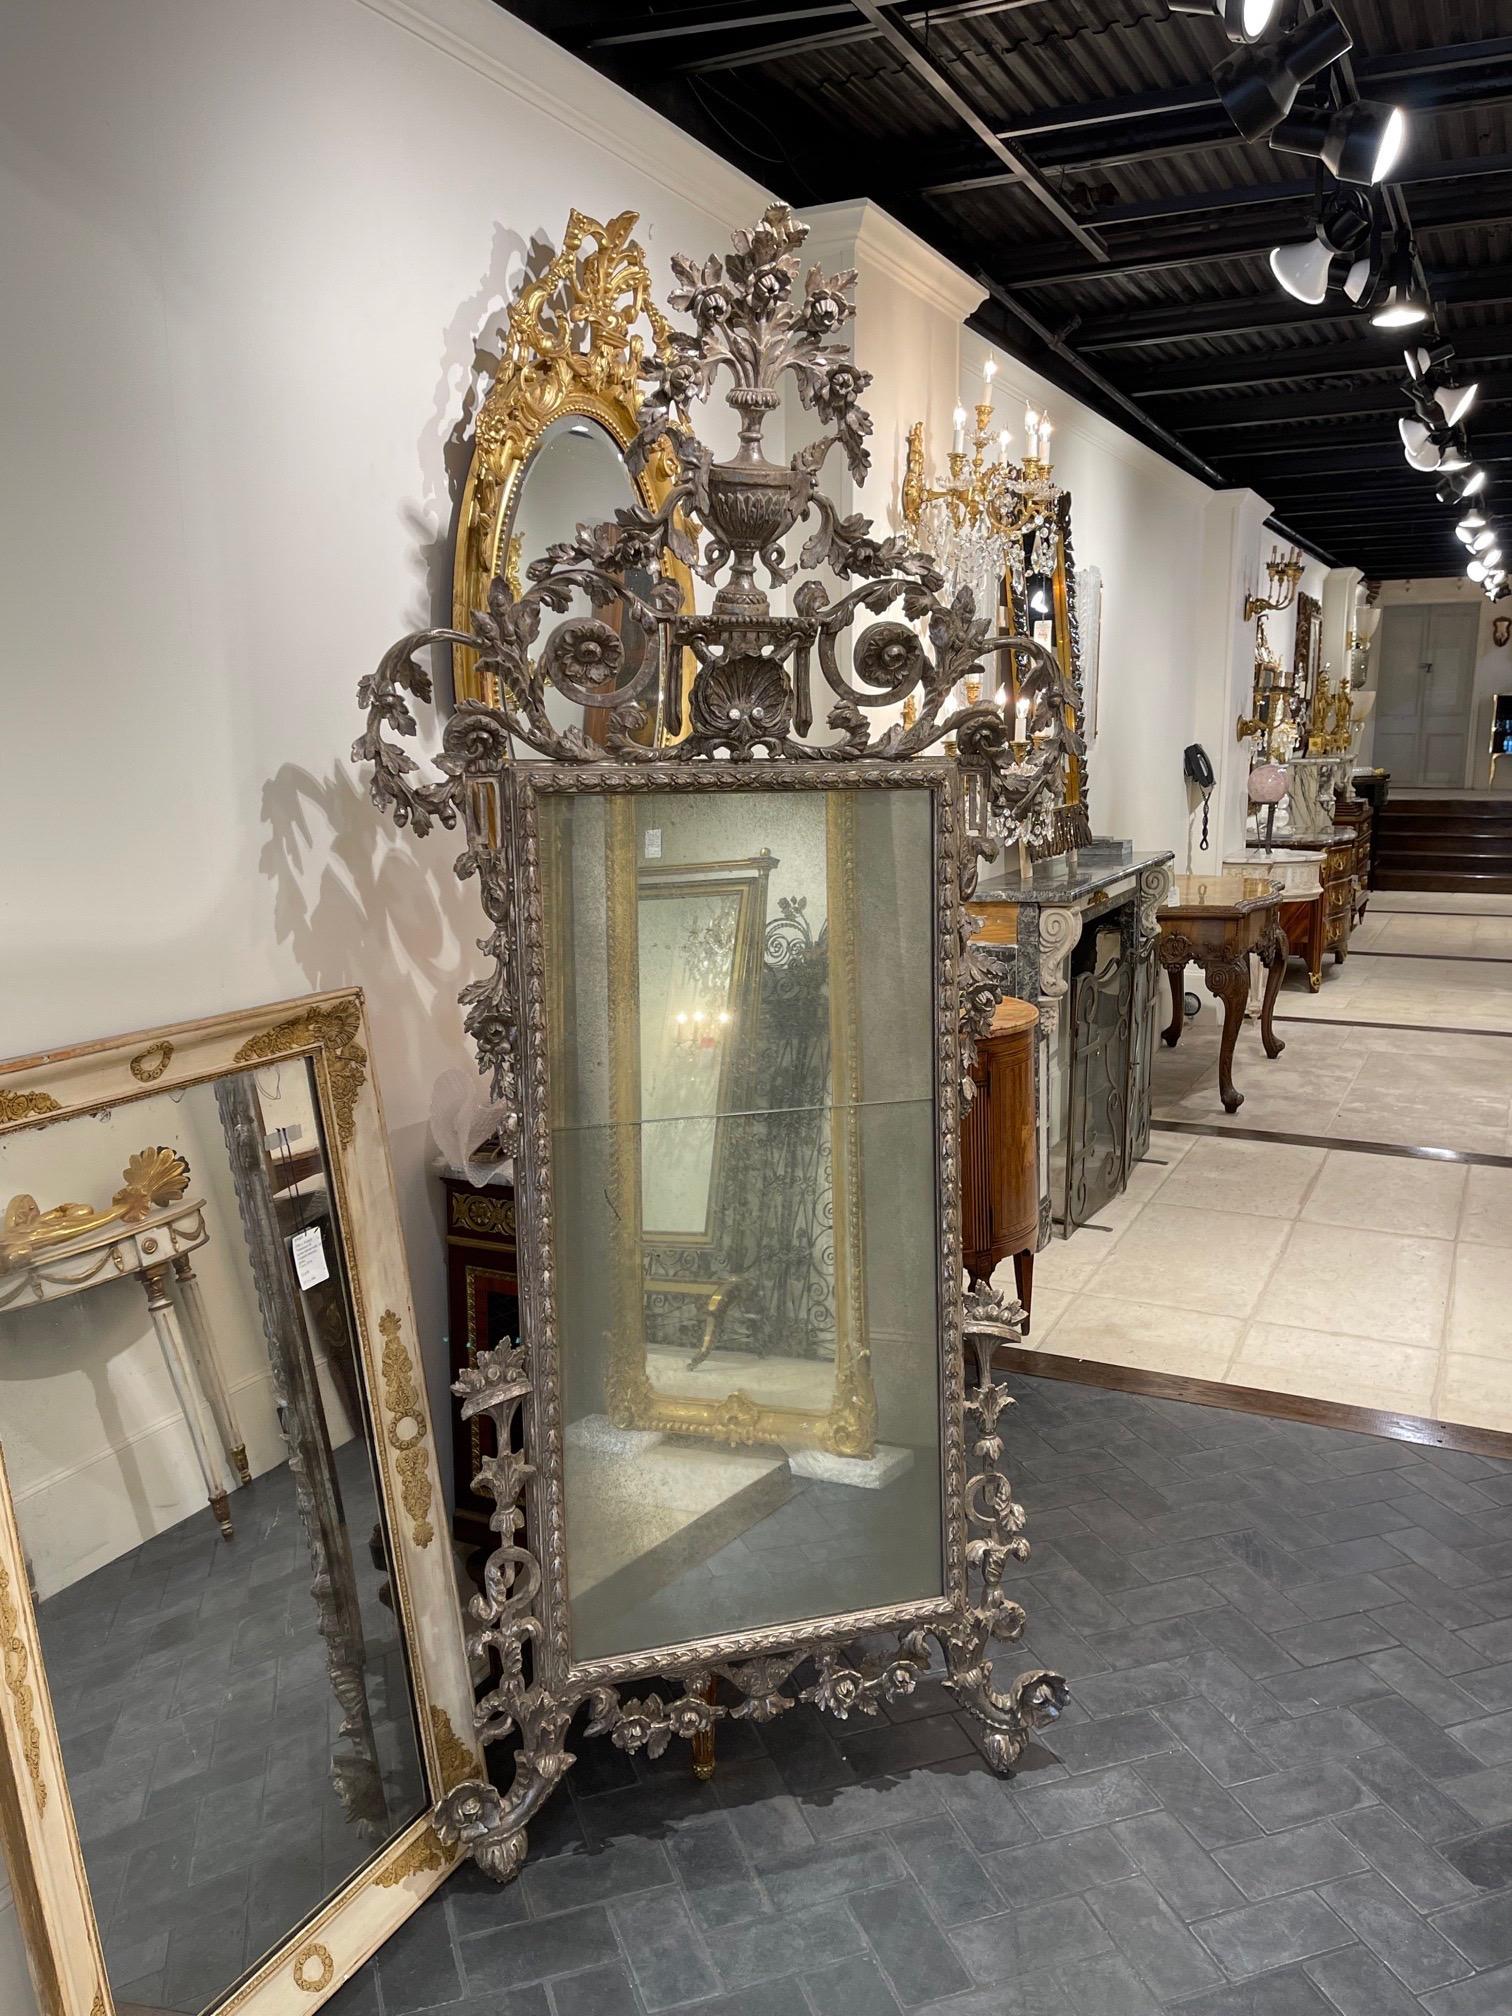 Exquisite antique Italian carved wood silver leaf mirror. Exceptional carving on this piece featuring an overflowing urn with floral images. Very fine quality!!